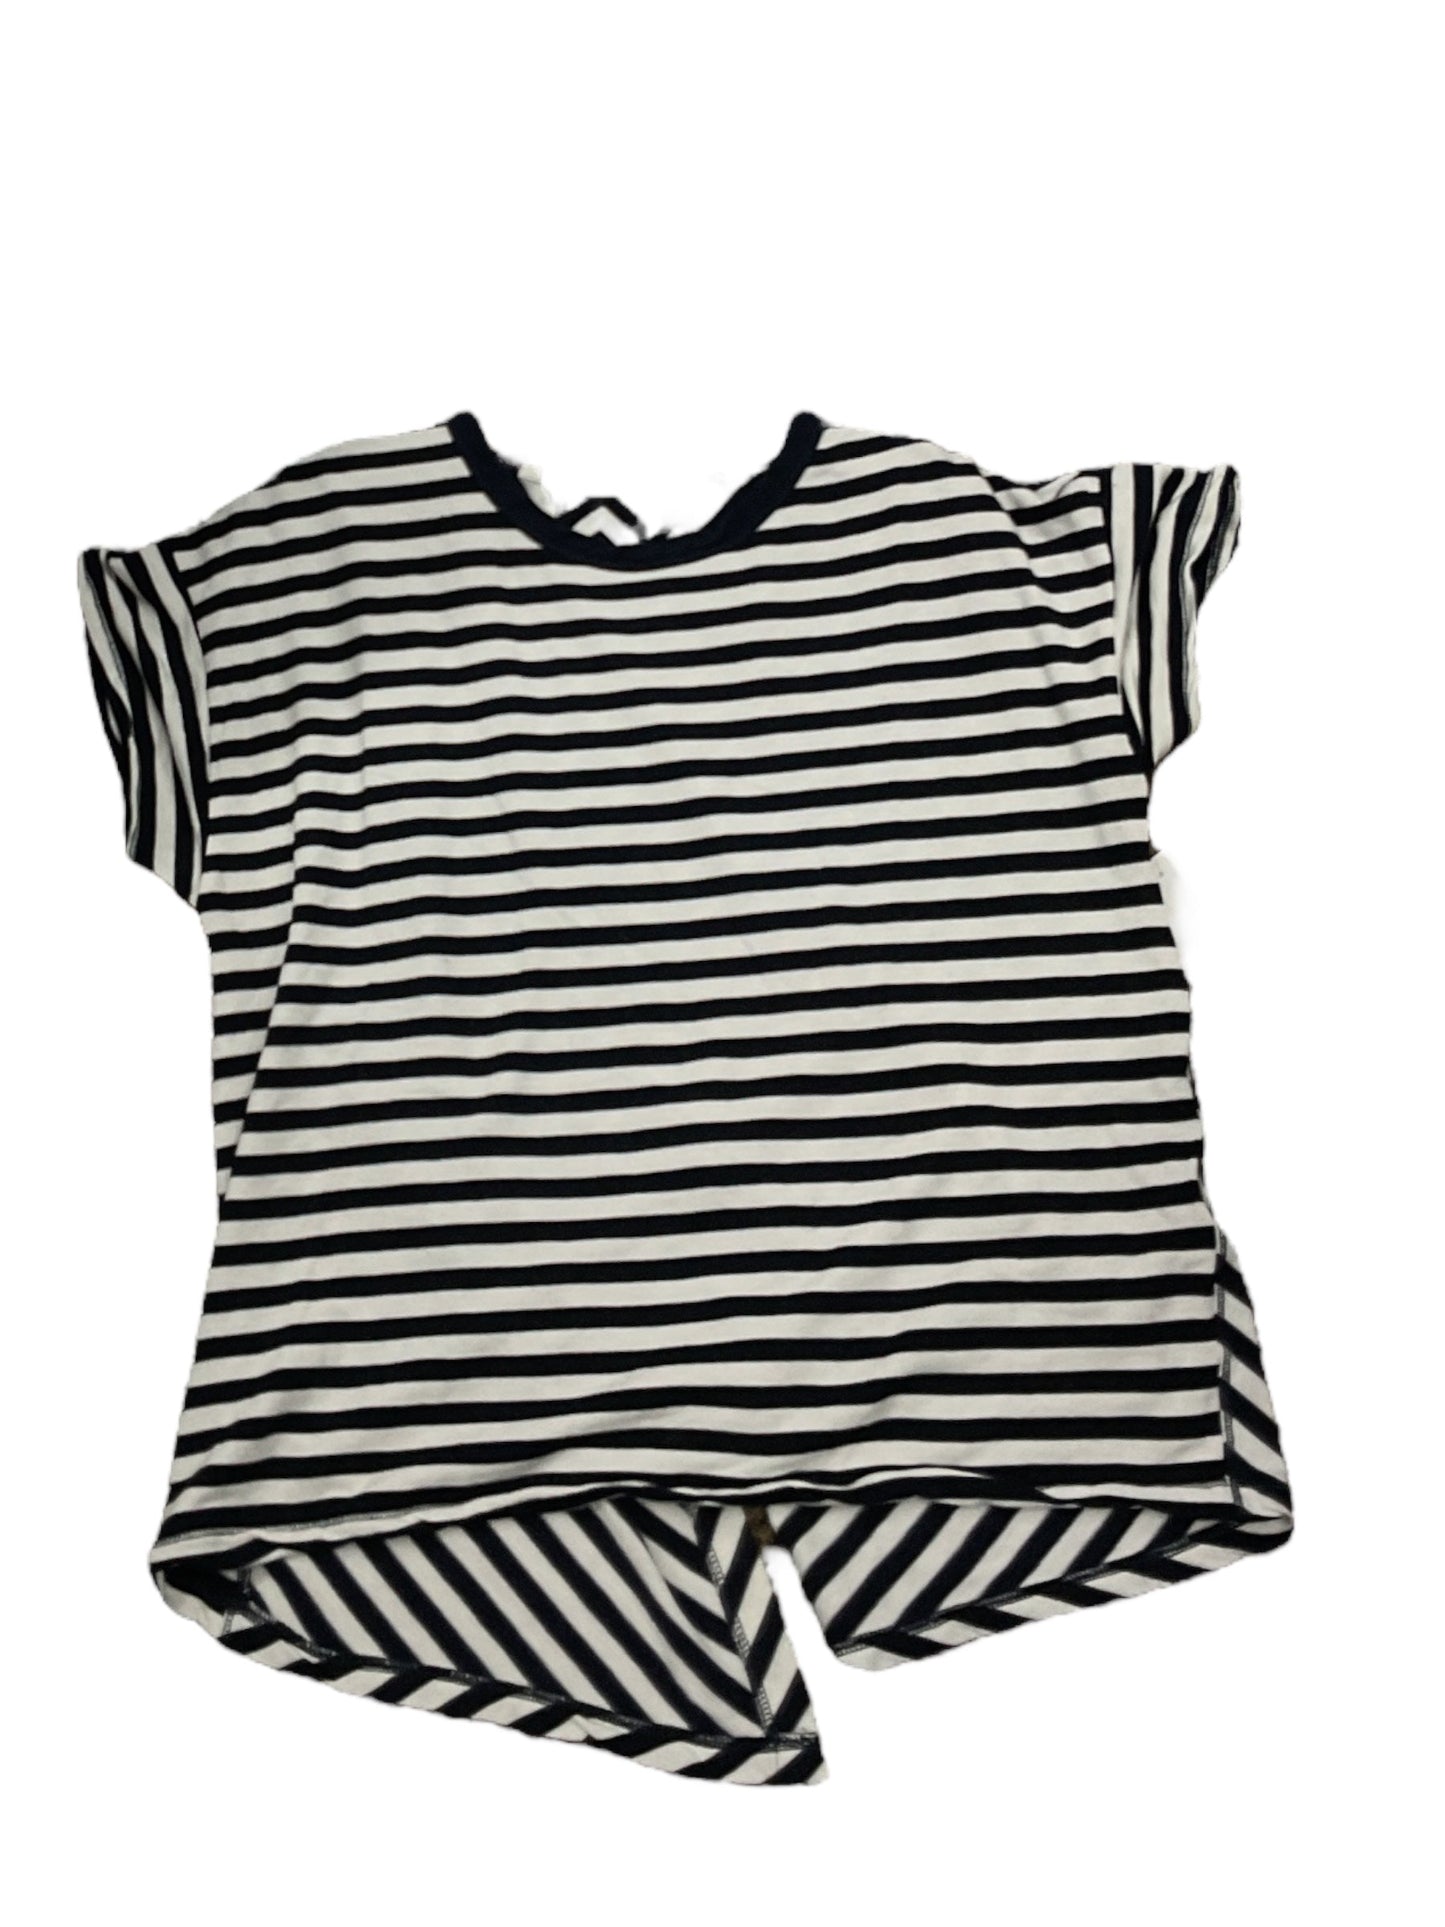 Striped Pattern Top Short Sleeve Rag And Bone, Size L